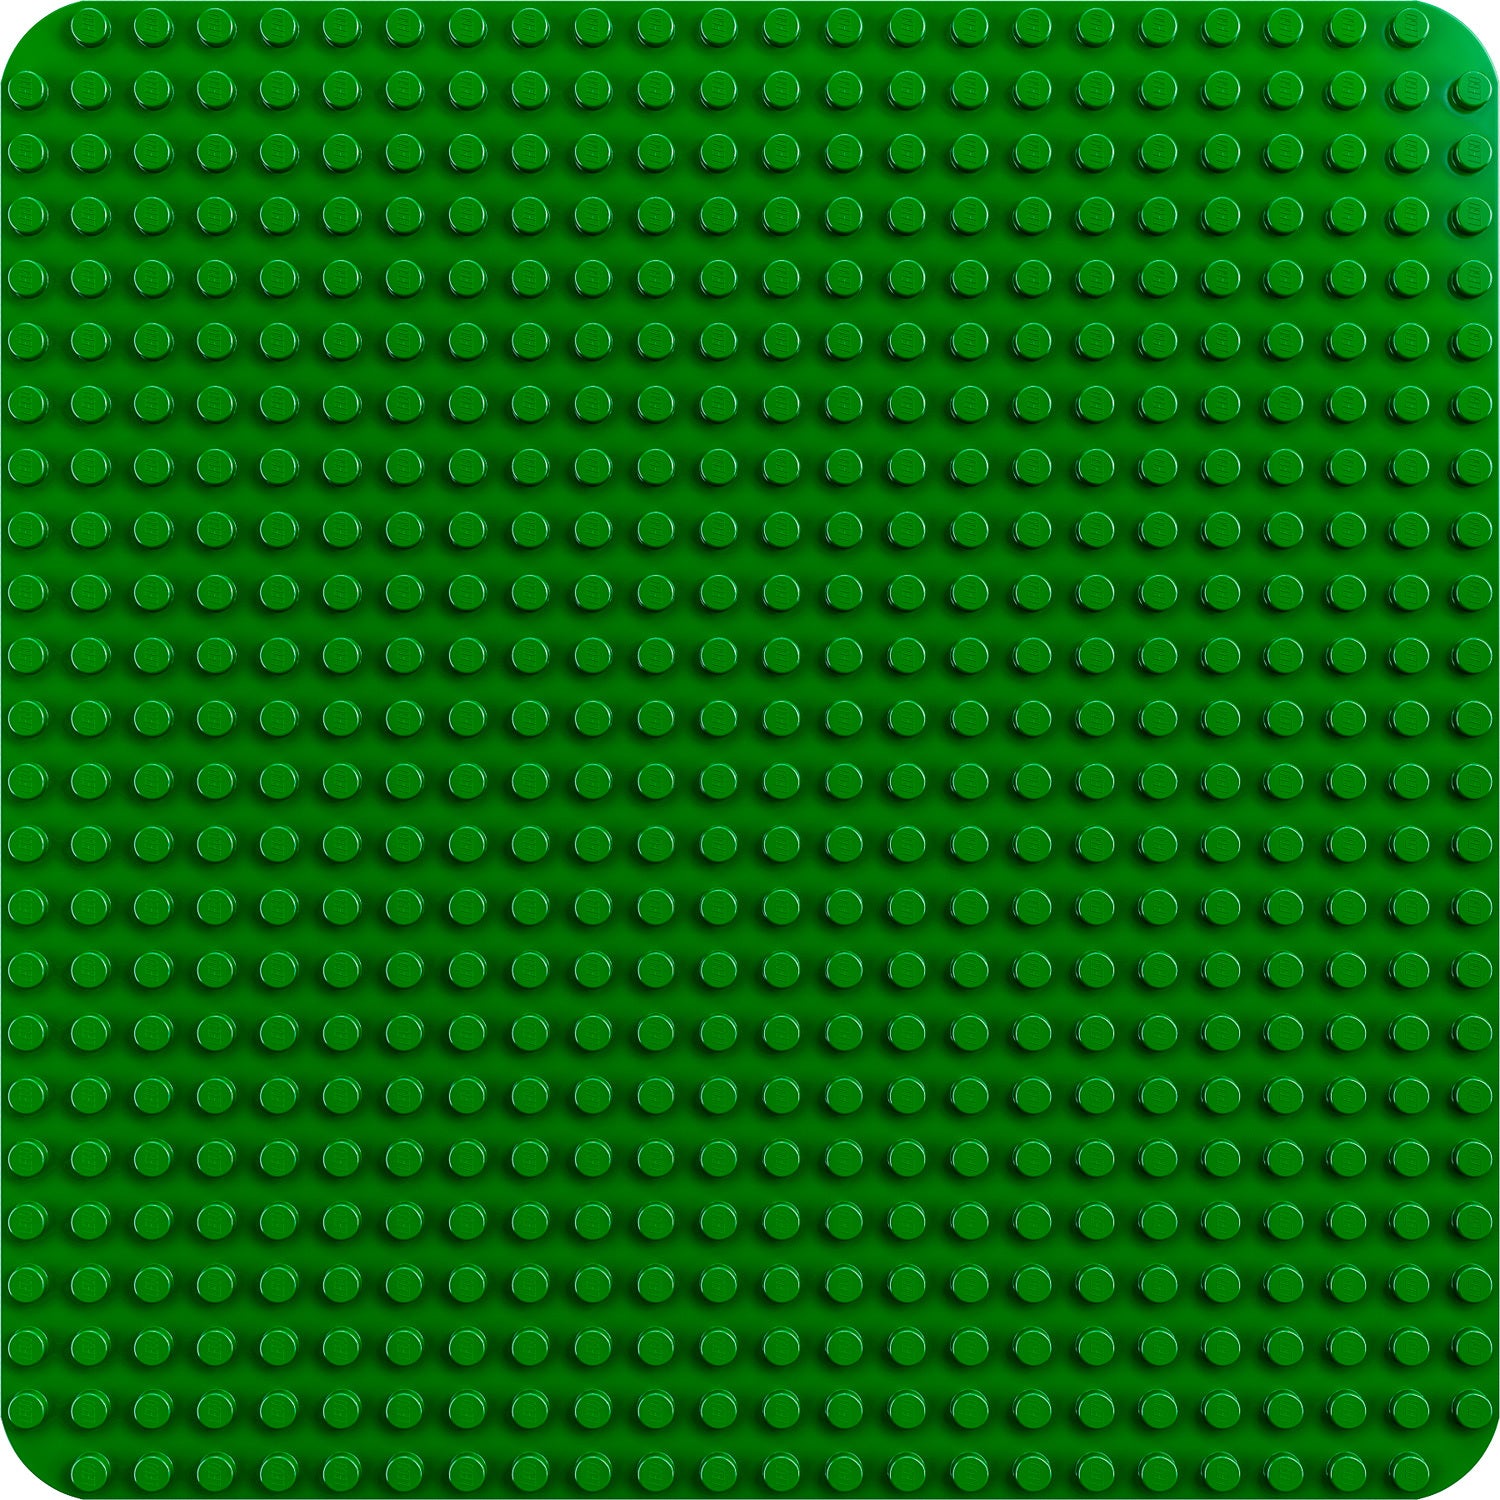 LEGO® DUPLO® Green Building Plate